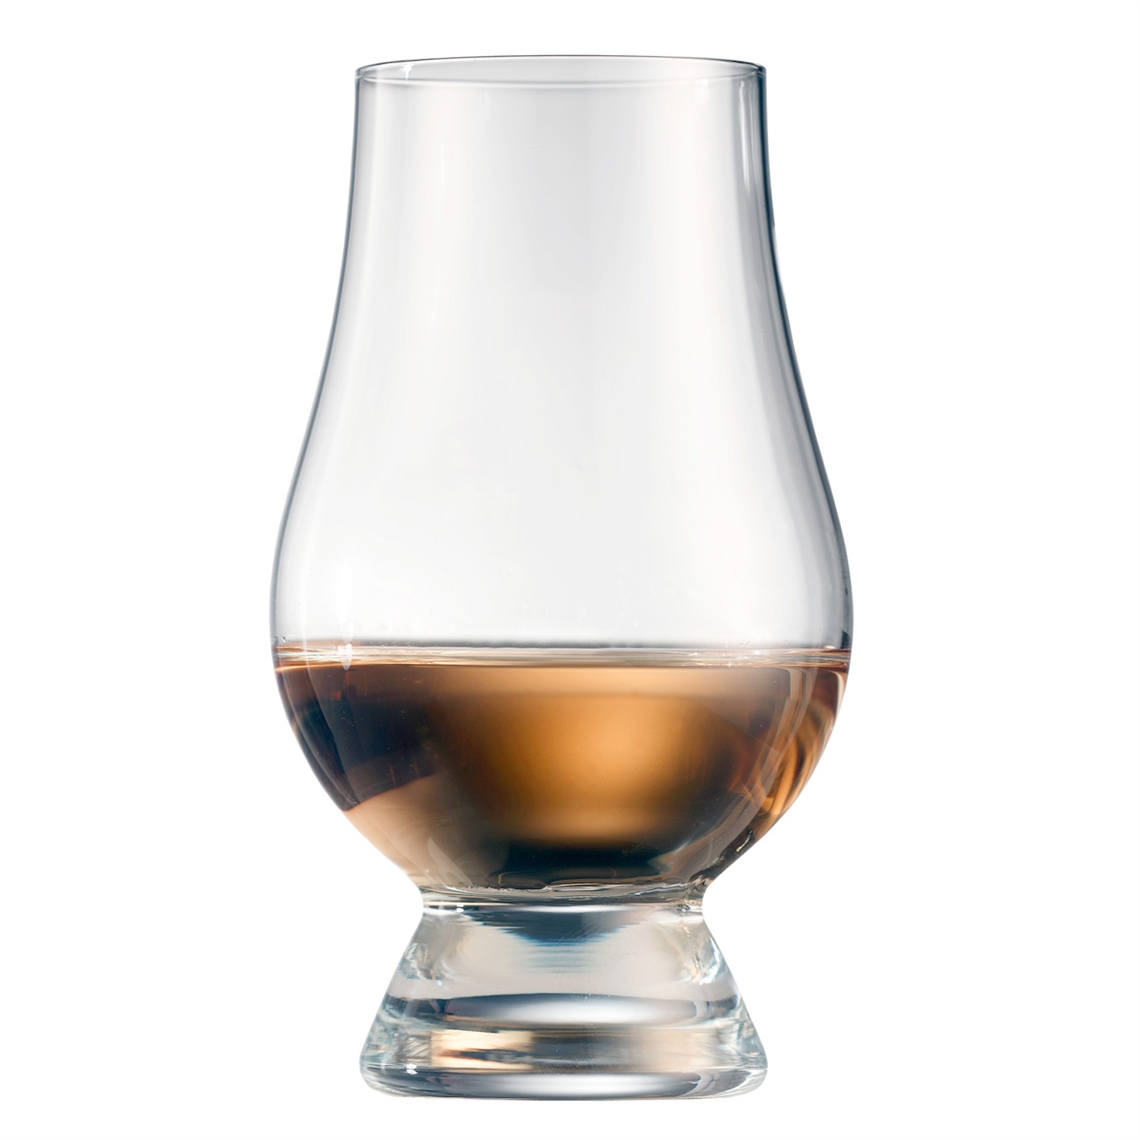 View more taste from our Whisky Glasses range